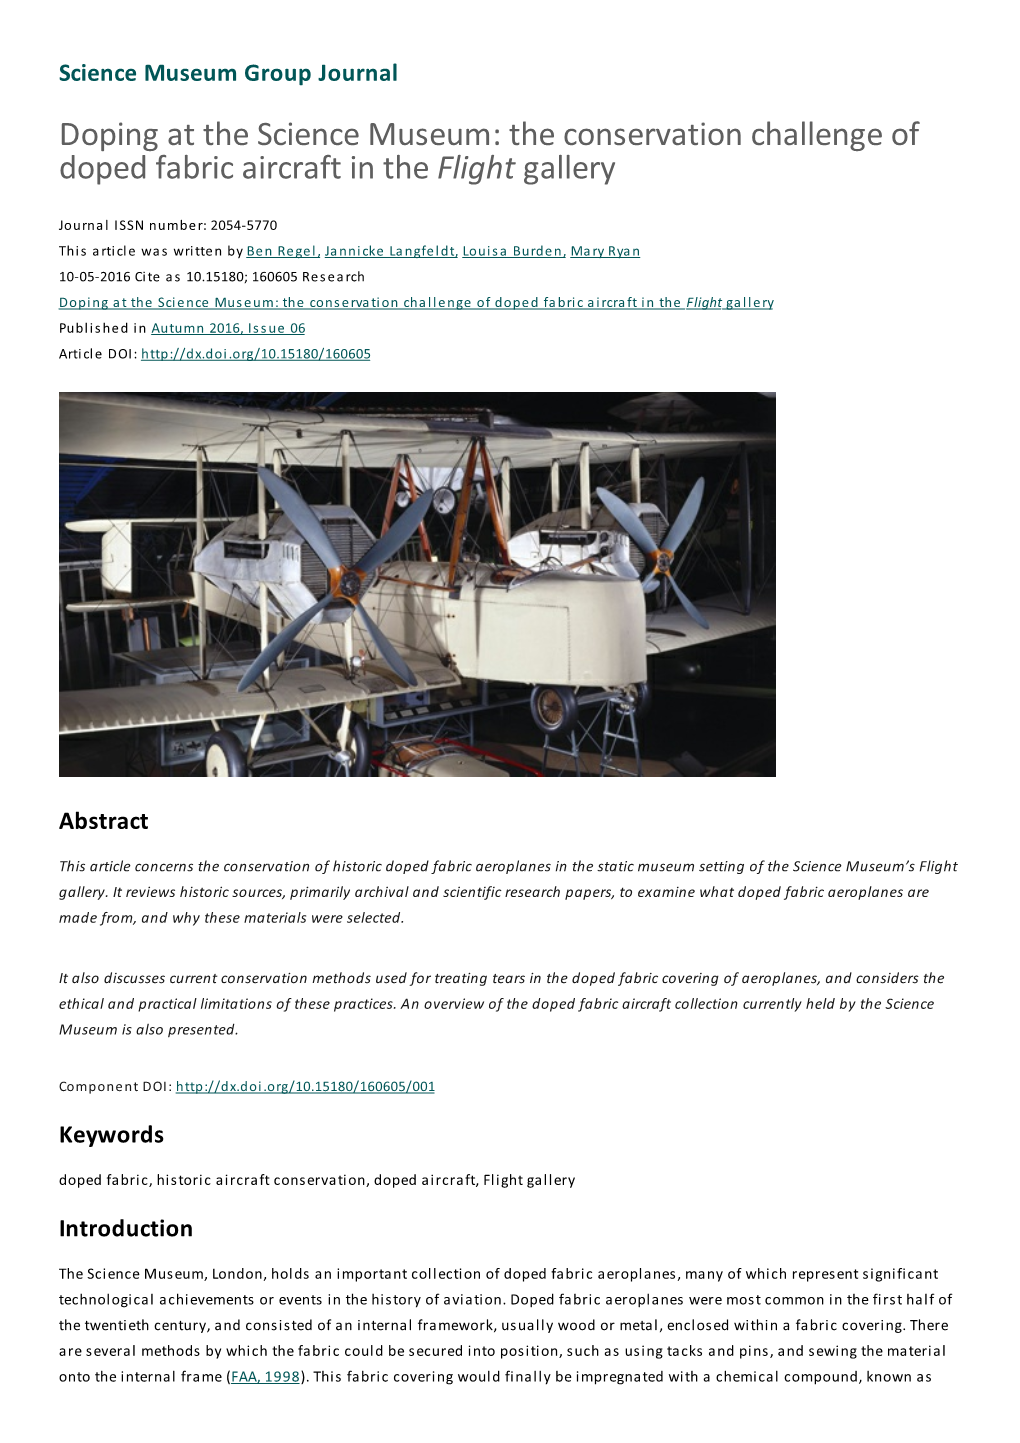 Doping at the Science Museum: the Conservation Challenge of Doped Fabric Aircraft in the Flight Gallery